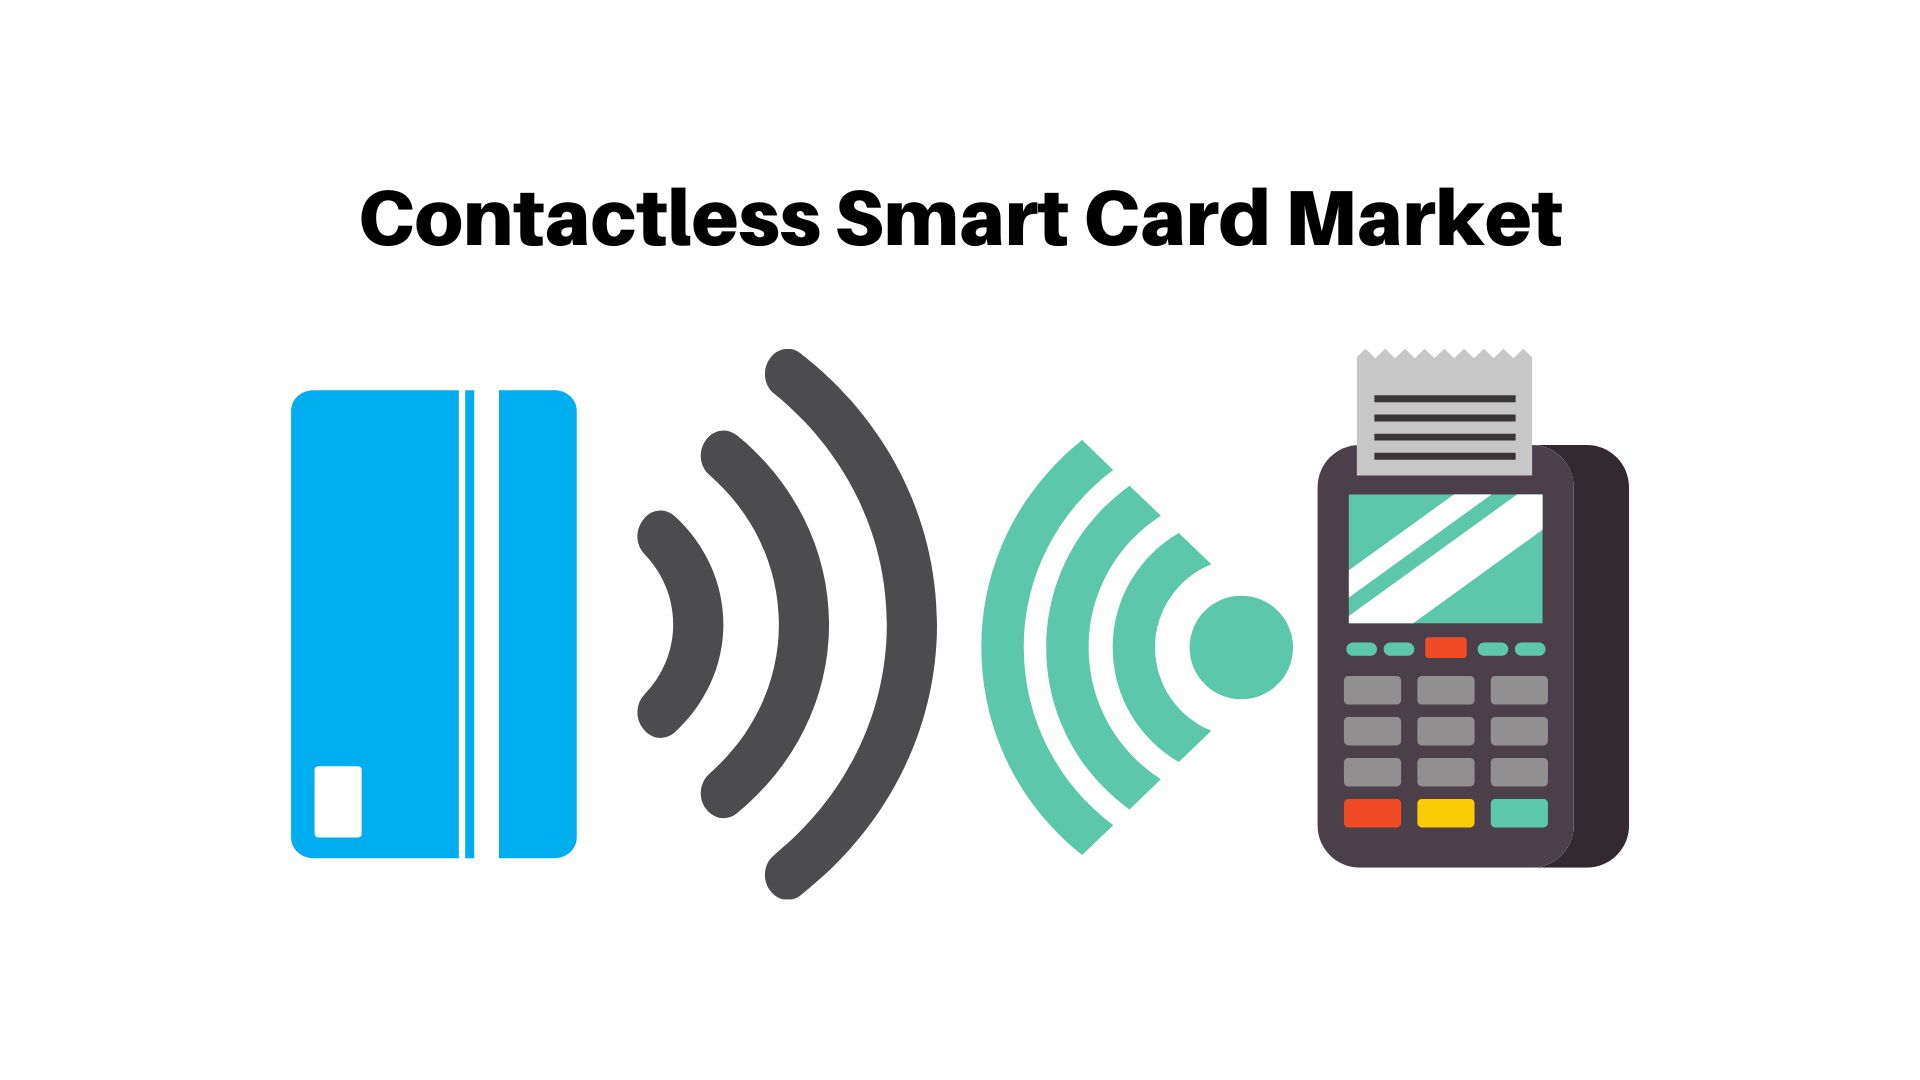 Contactless Smart Card Market is expected to be valued around USD 37.21 Billion by 2033